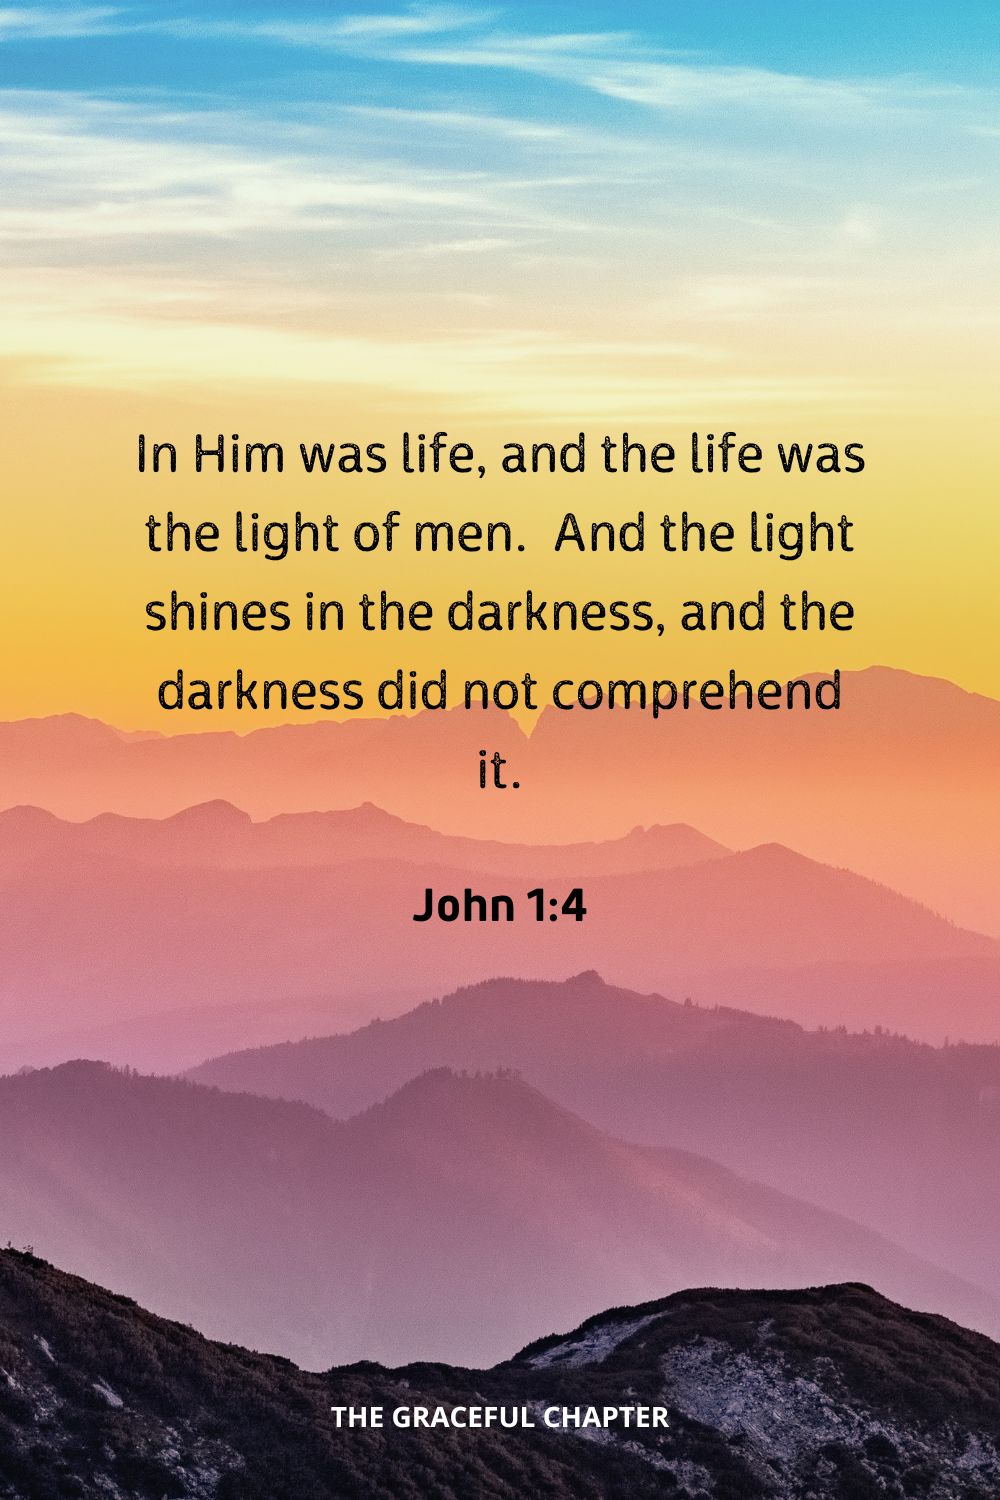 In Him was life, and the life was the light of men.  And the light shines in the darkness, and the darkness did not comprehend it.